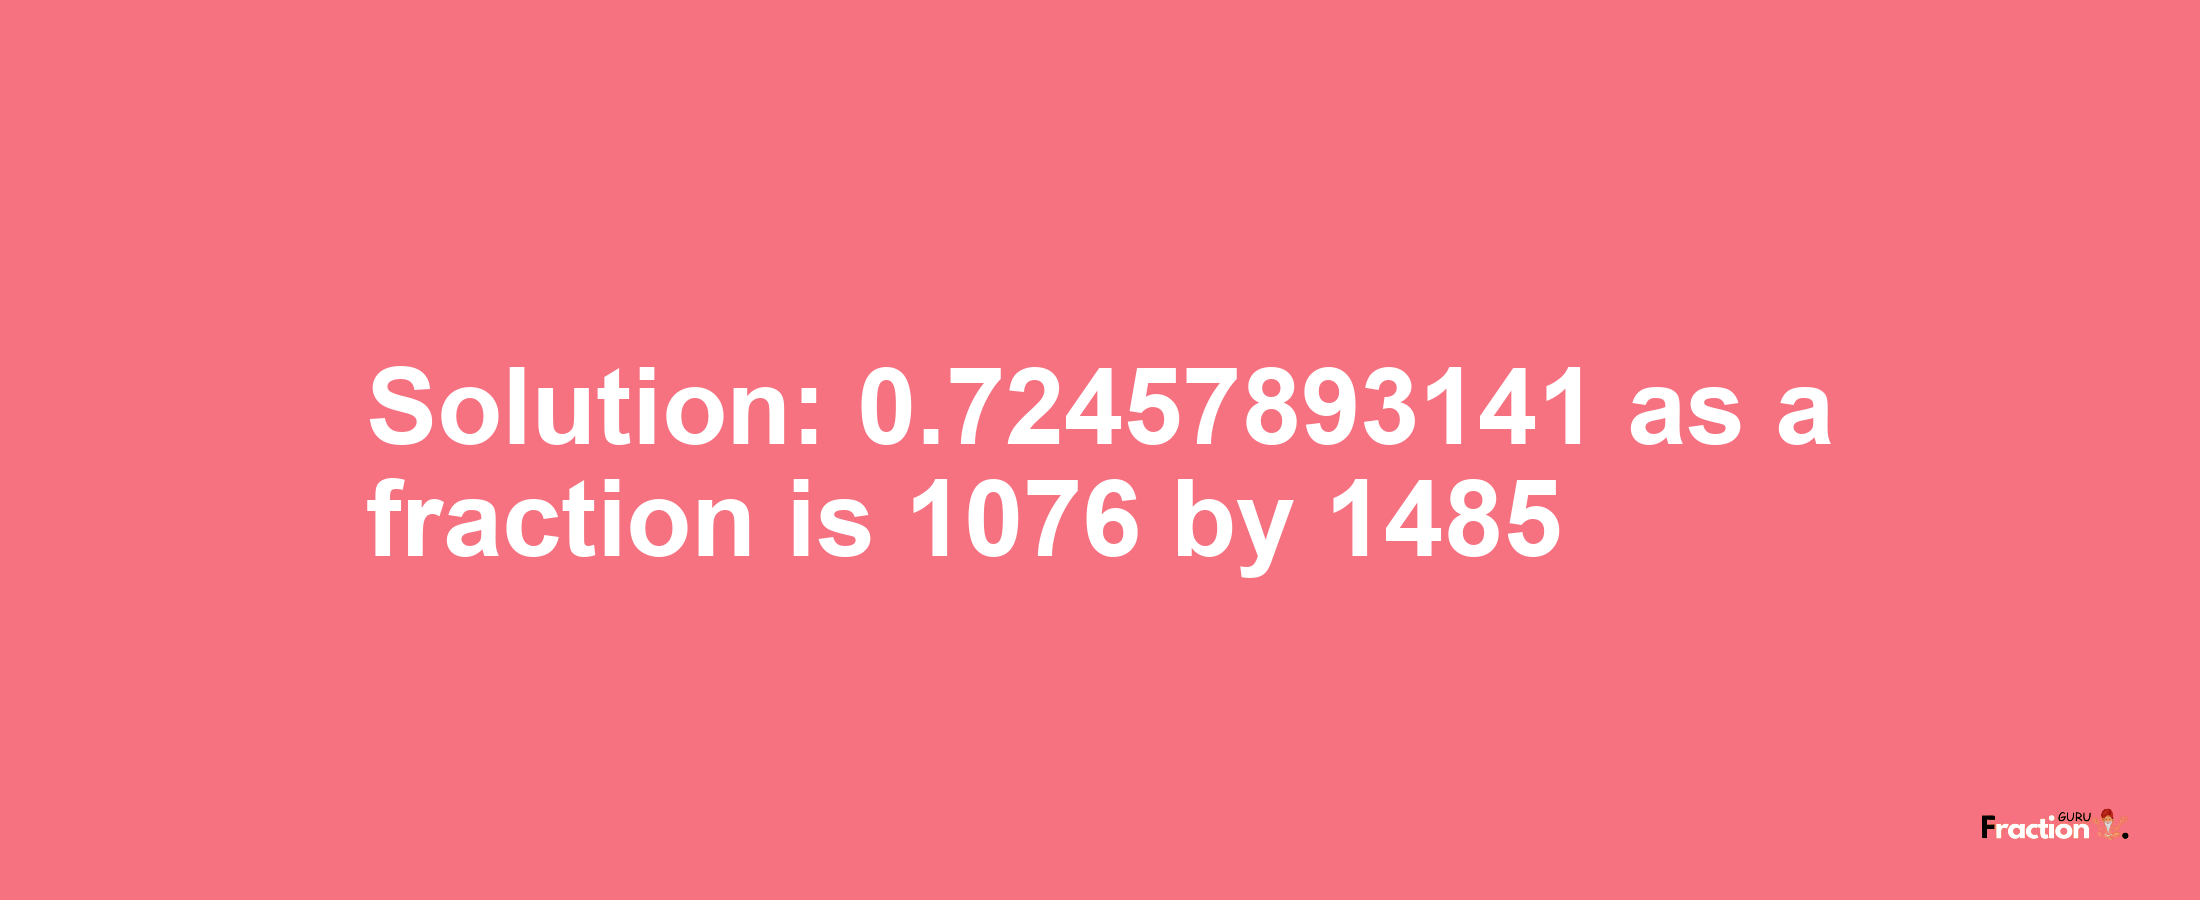 Solution:0.72457893141 as a fraction is 1076/1485